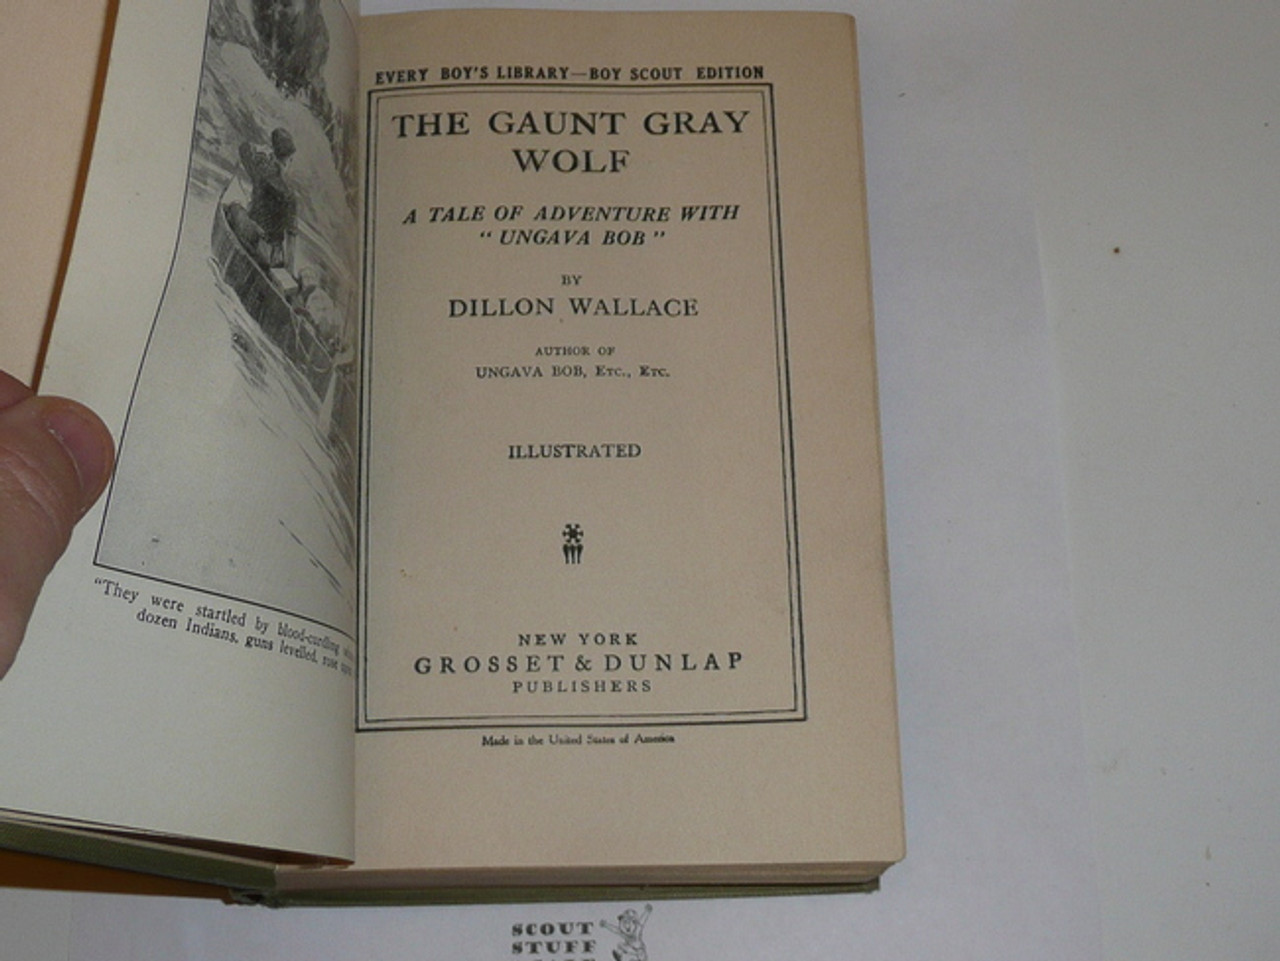 The Gaunt Gray Wolf, By Dillion Wallace, 1914, Every Boy's Library Edition, Type Two Binding